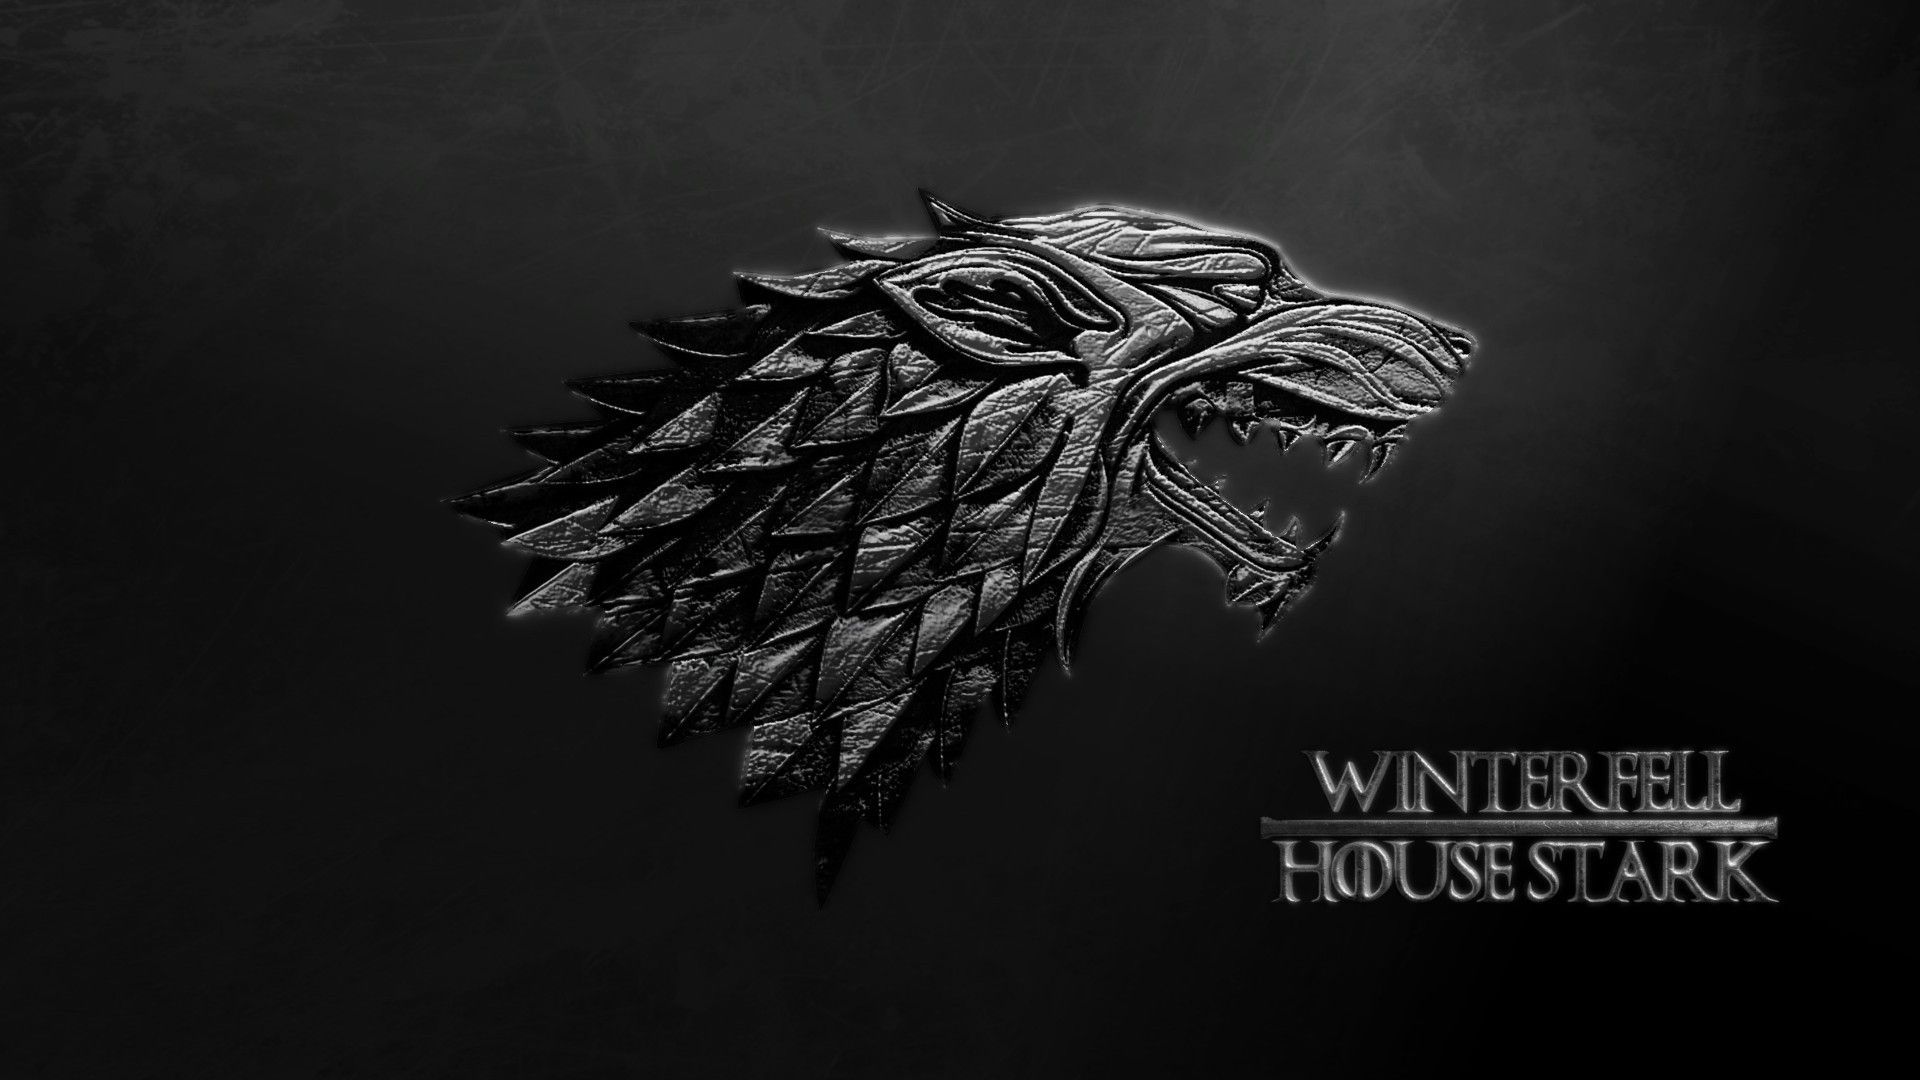 House Stark Game of Thrones Wallpaper HD Movie Poster Wallpaper HD